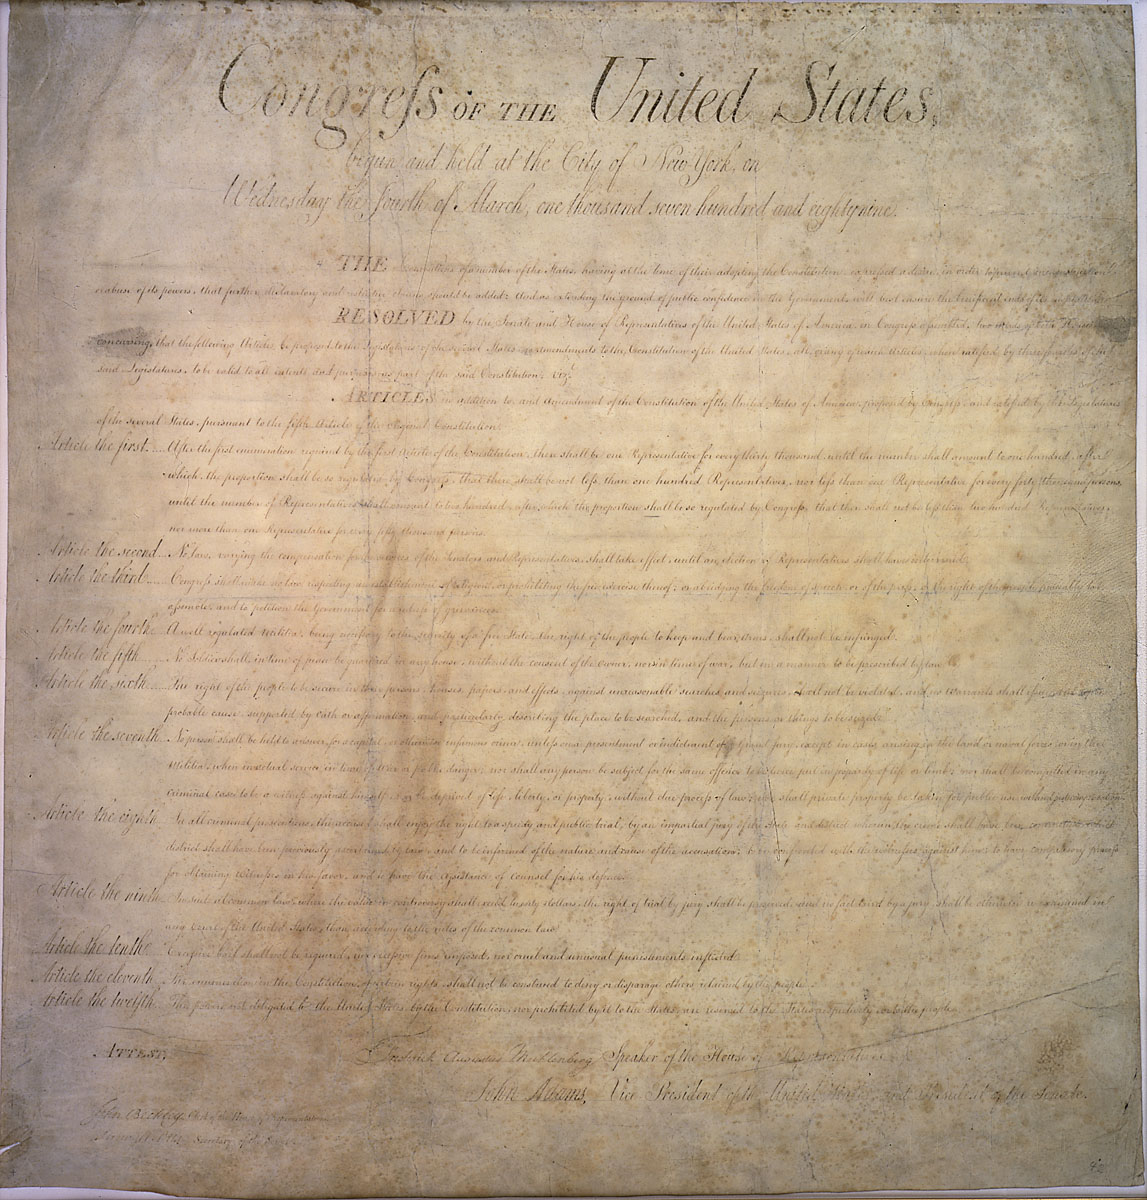 The Us Constitution Bill Of Rights Amendments